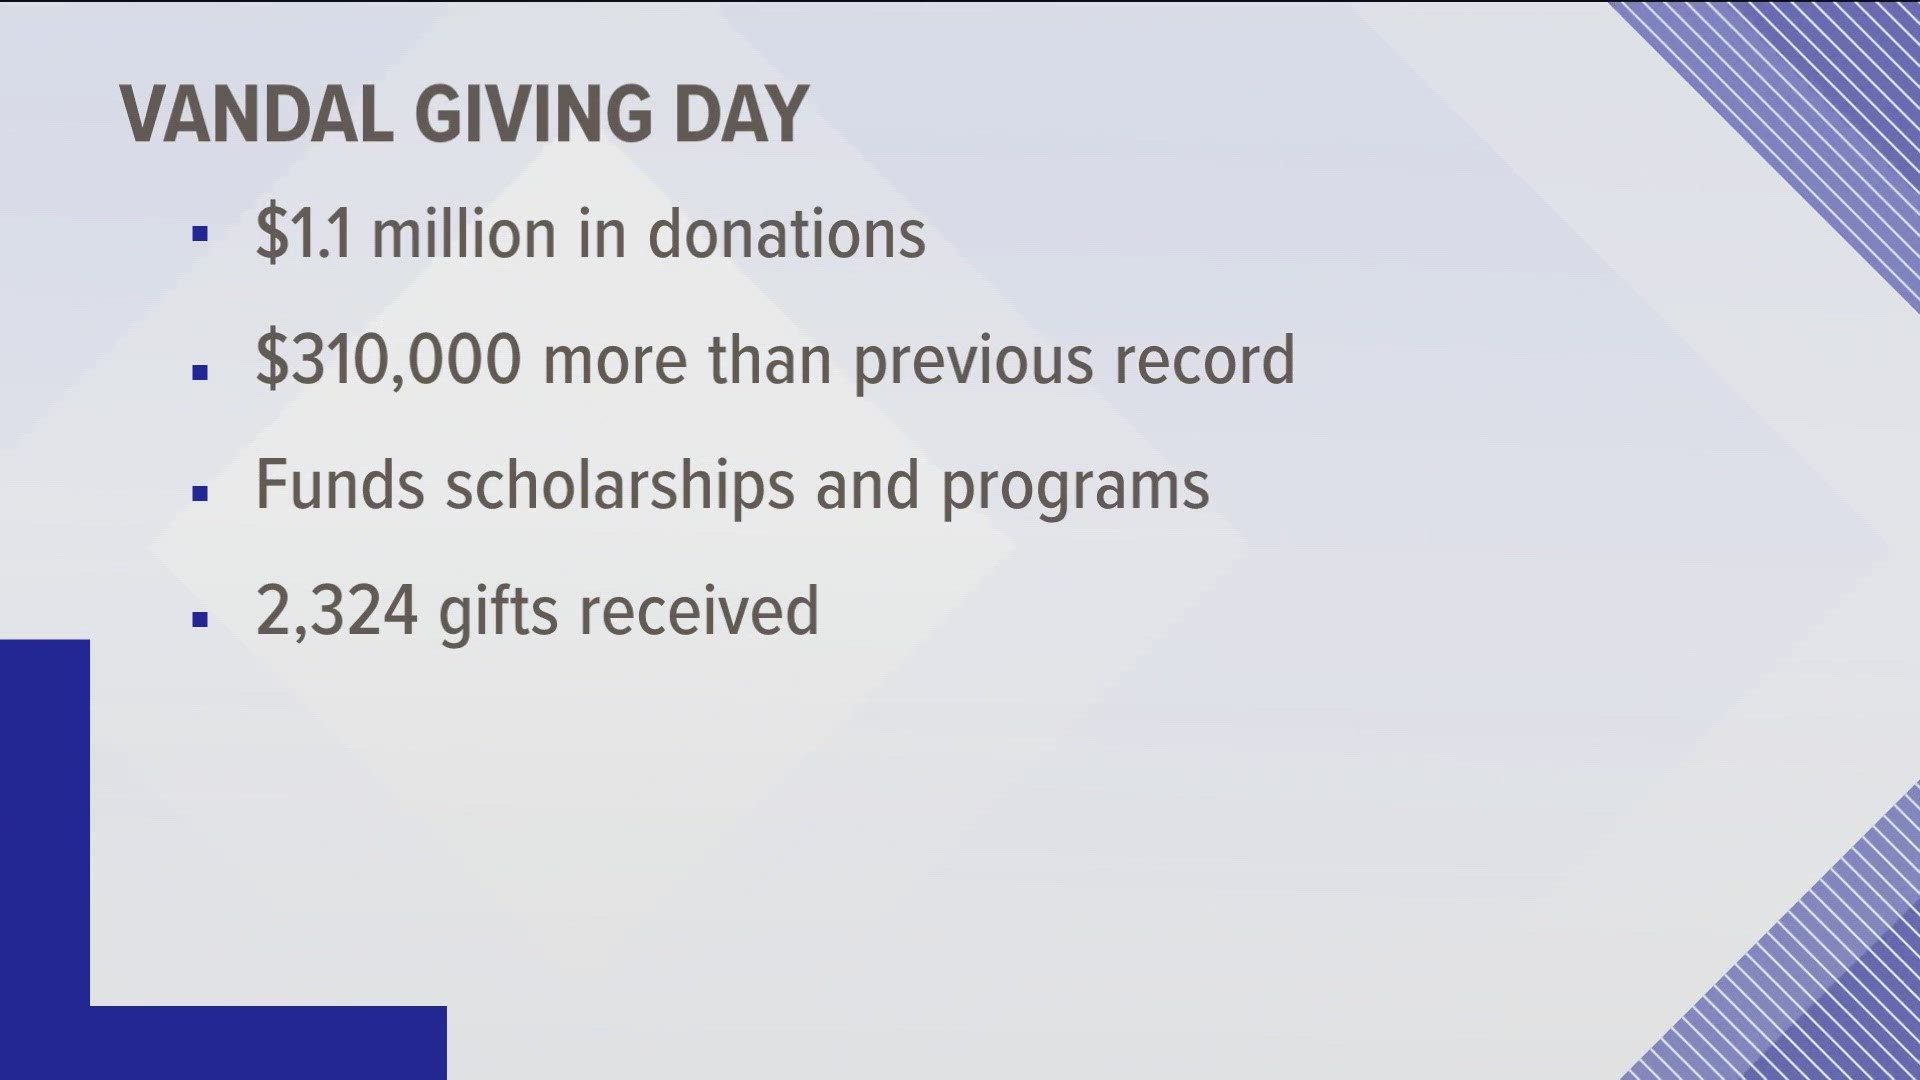 The U of I stated that this year's donations totaled $310,000 more than the previous record, set in 2023.